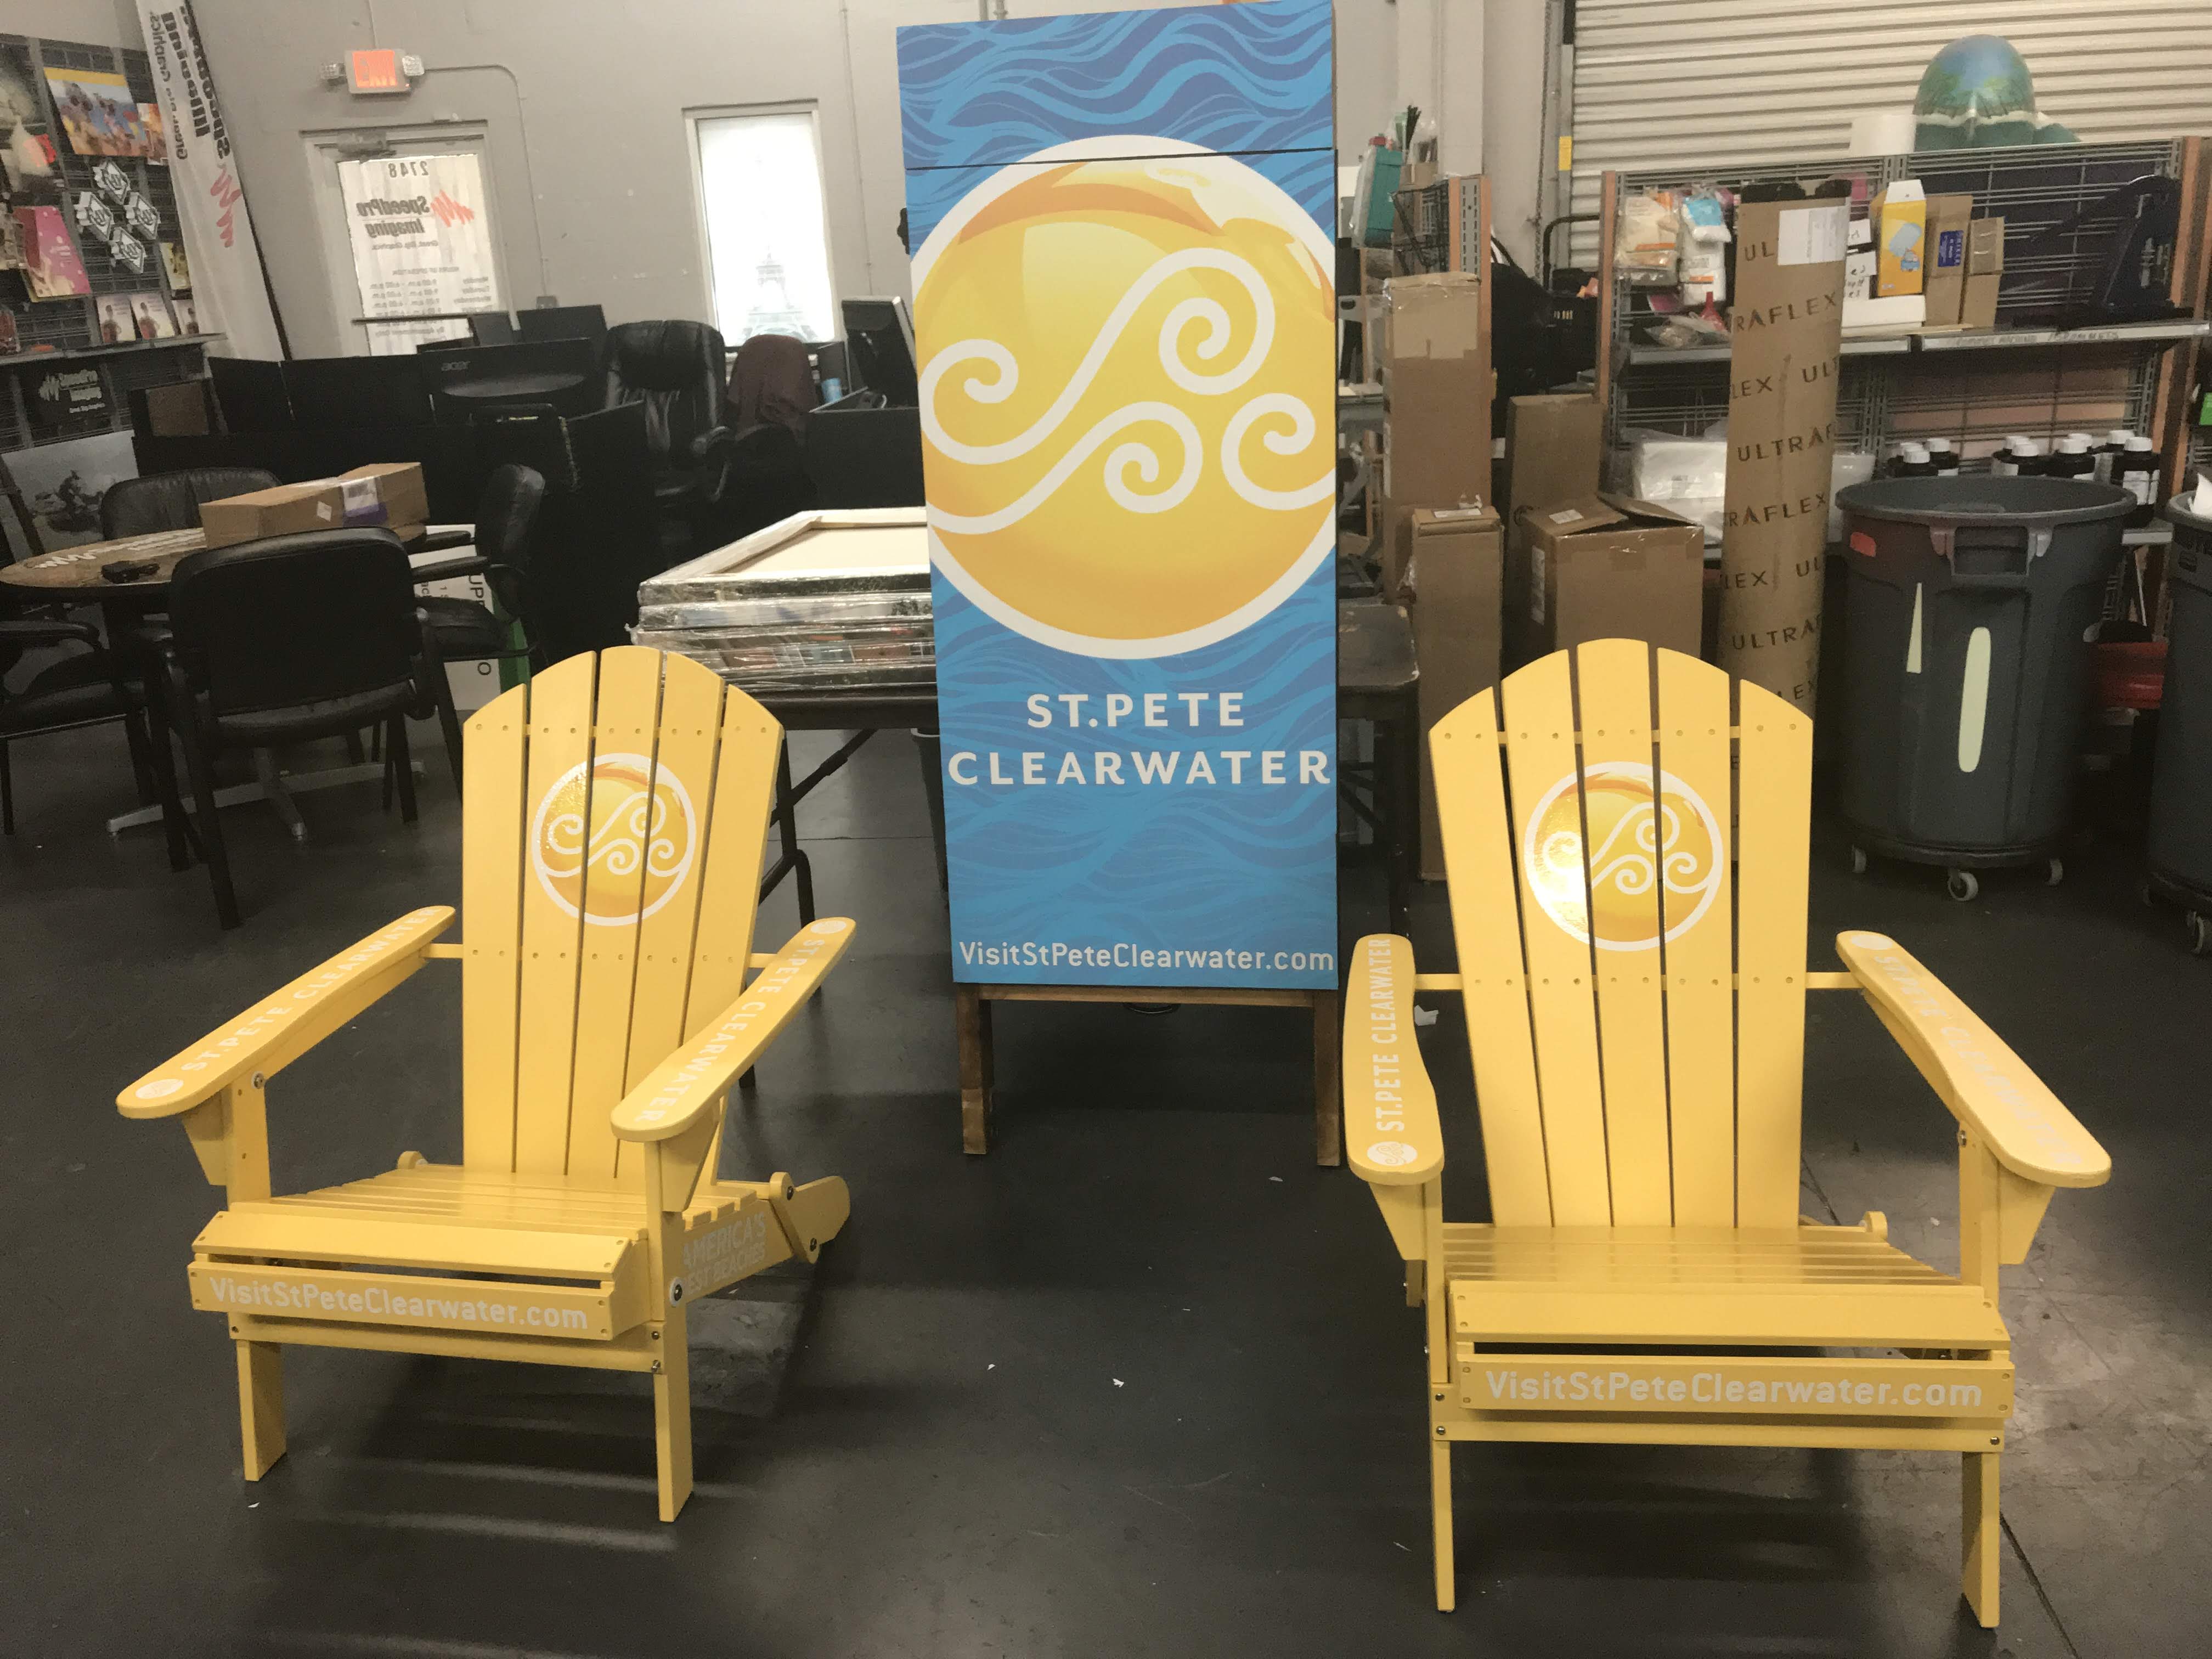 two yellow adirondack chairs in front of sign for St. Pete Clearwater